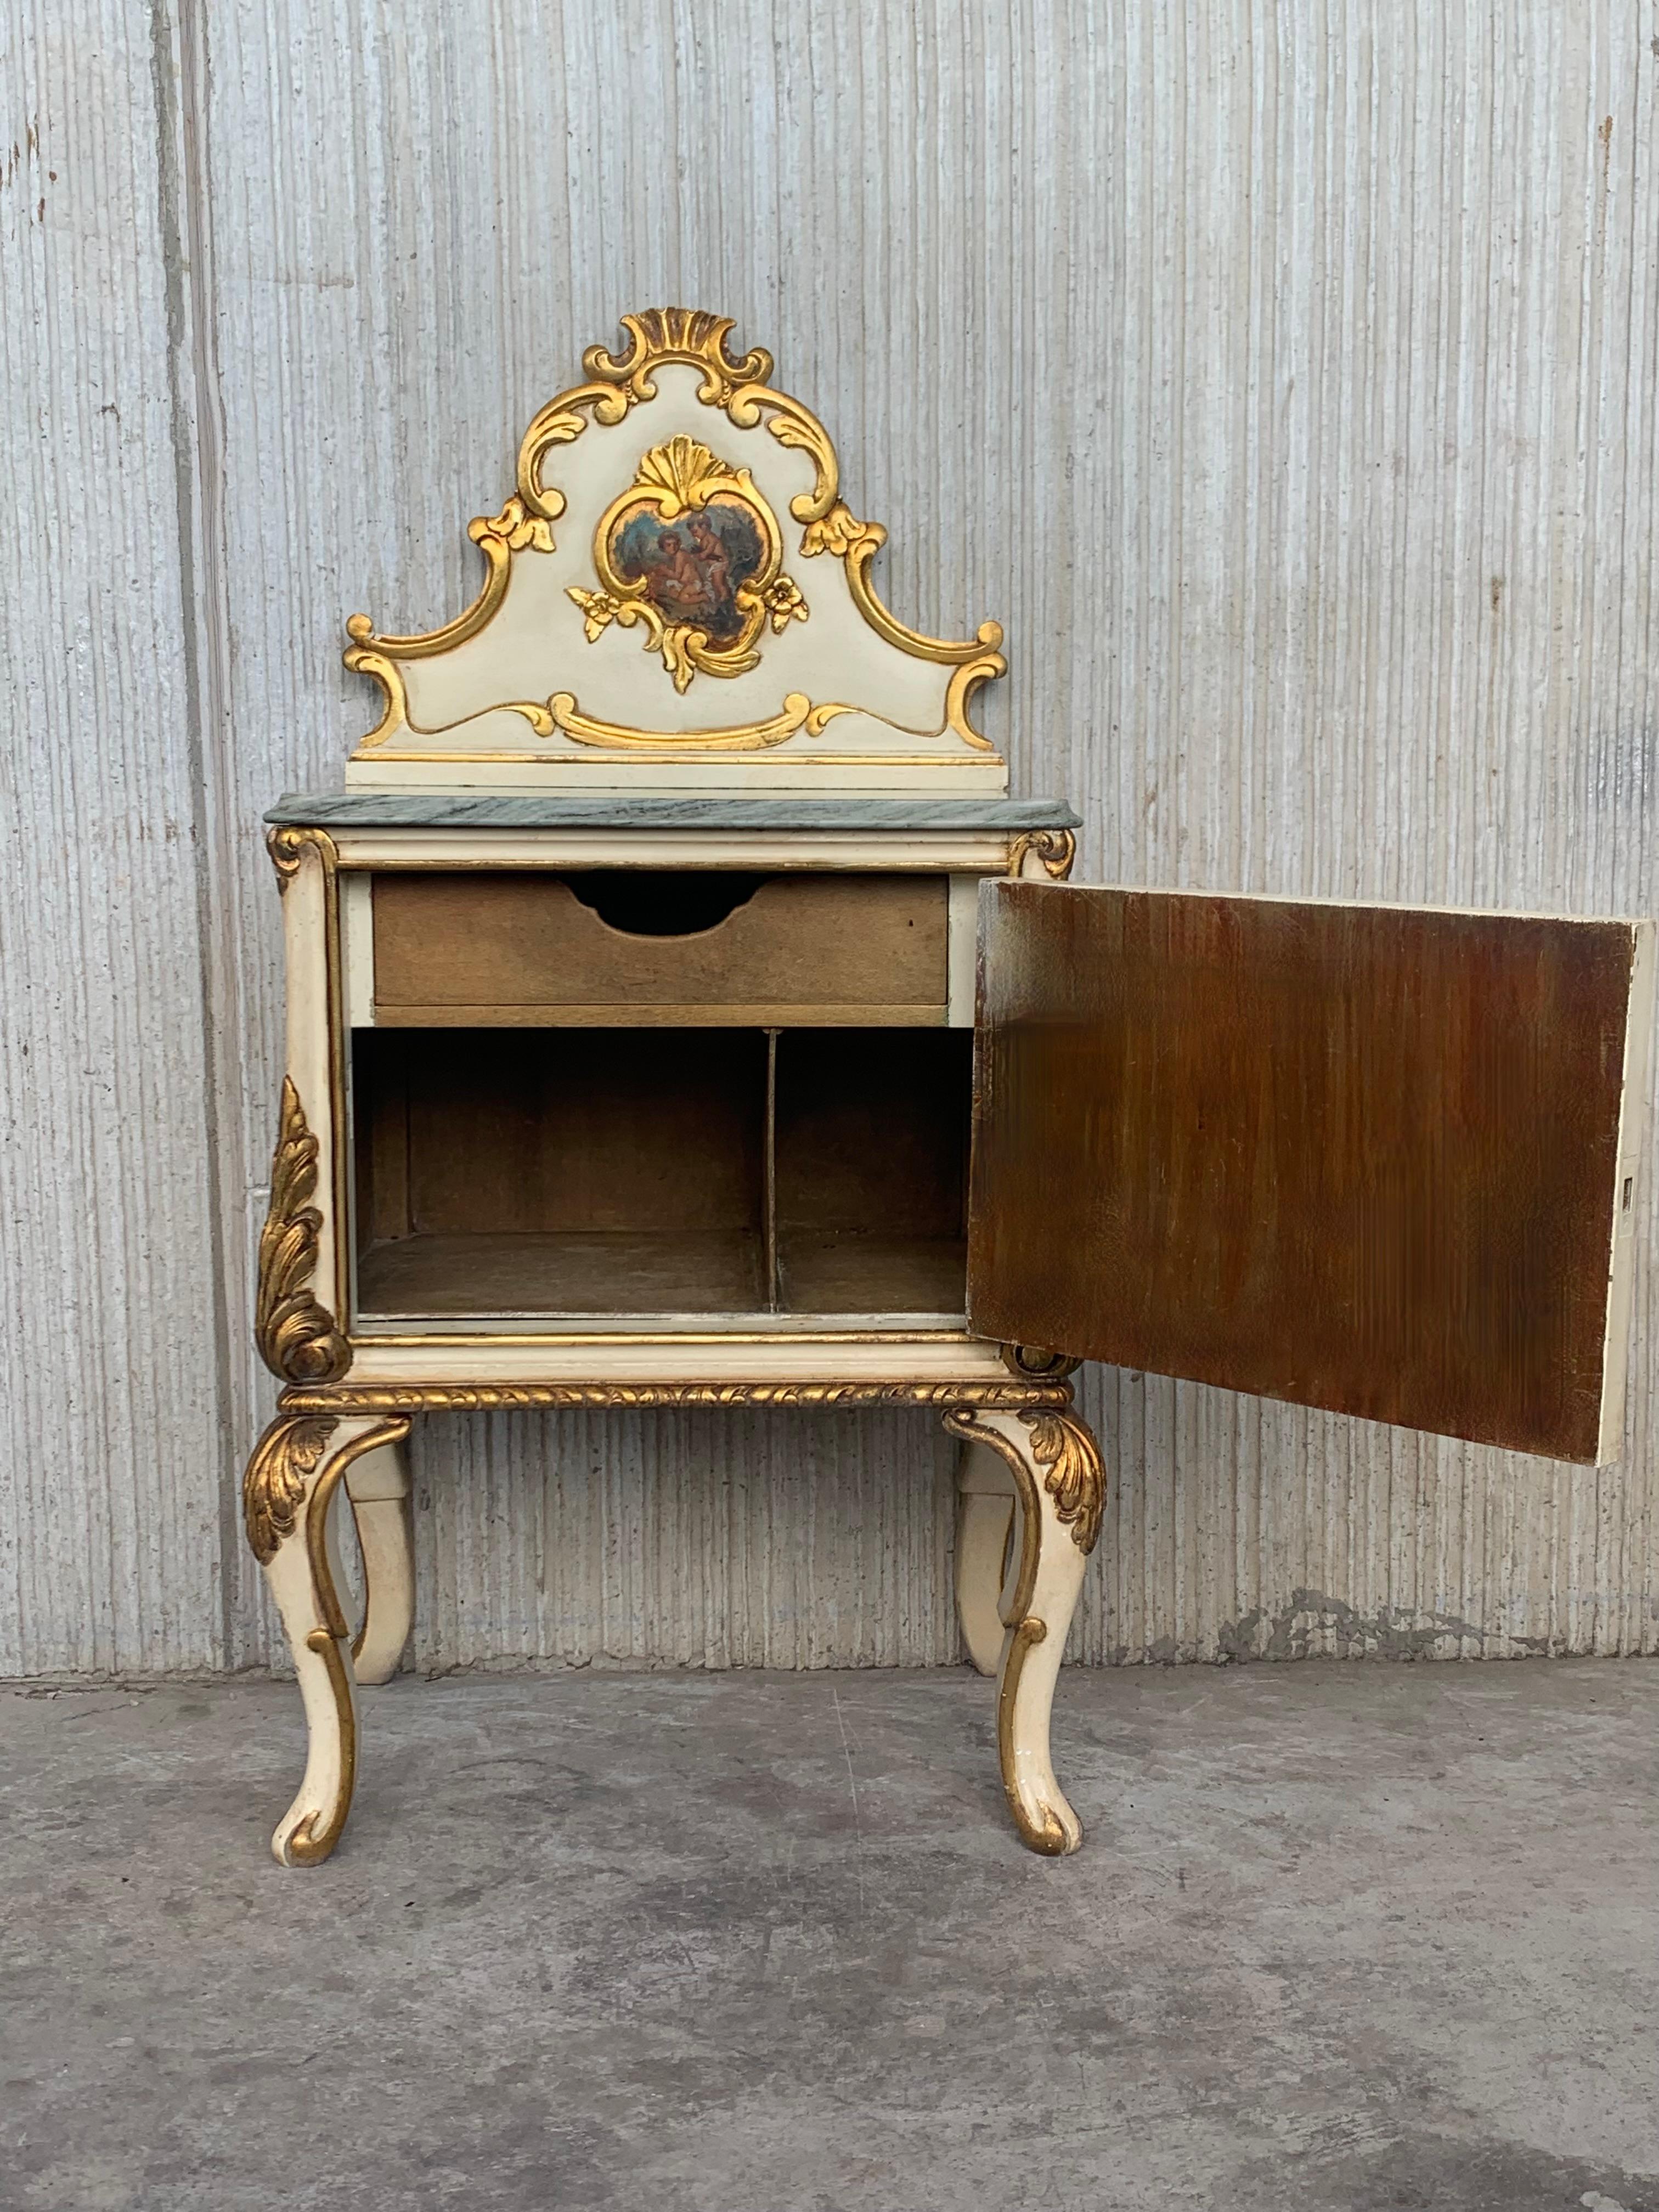 19th Century Pair of White Venetian Nightstands with Marble Top and Crest Handpainted Motifs For Sale